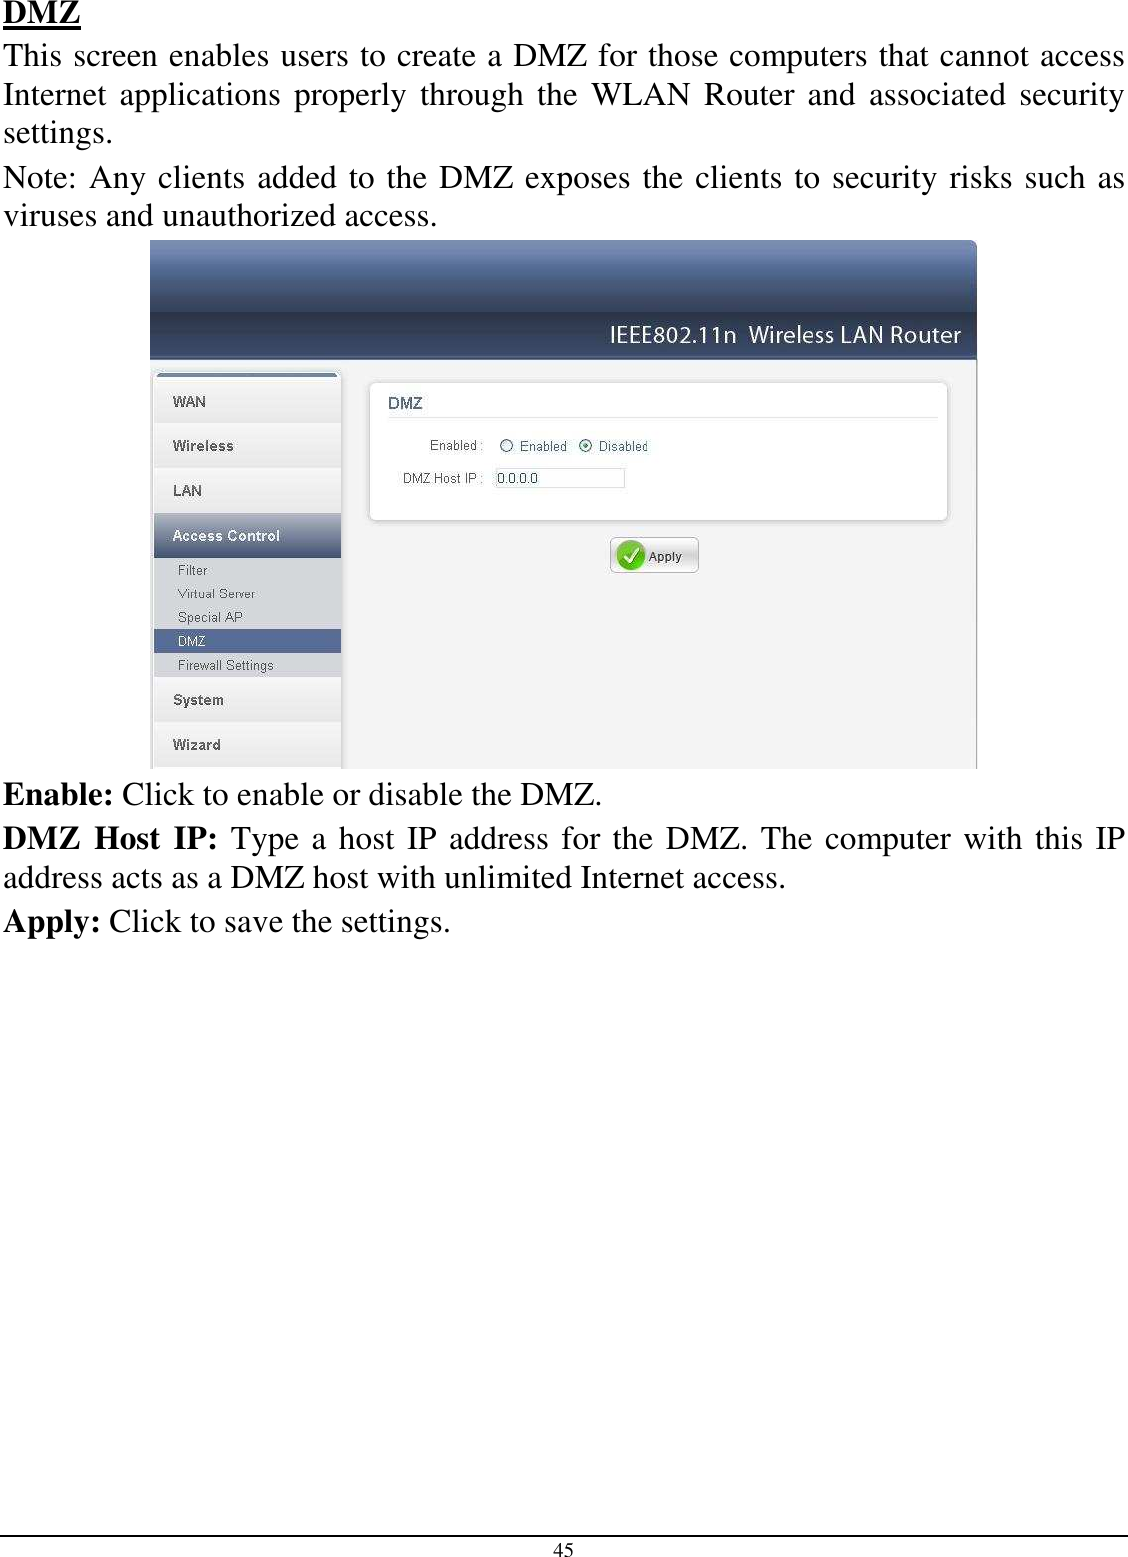 45 DMZ This screen enables users to create a DMZ for those computers that cannot access Internet  applications  properly through  the  WLAN  Router and  associated security settings.  Note: Any clients added to the DMZ exposes the clients to security risks such as viruses and unauthorized access.  Enable: Click to enable or disable the DMZ. DMZ Host IP: Type a host IP address for the DMZ. The computer with this IP address acts as a DMZ host with unlimited Internet access. Apply: Click to save the settings.  